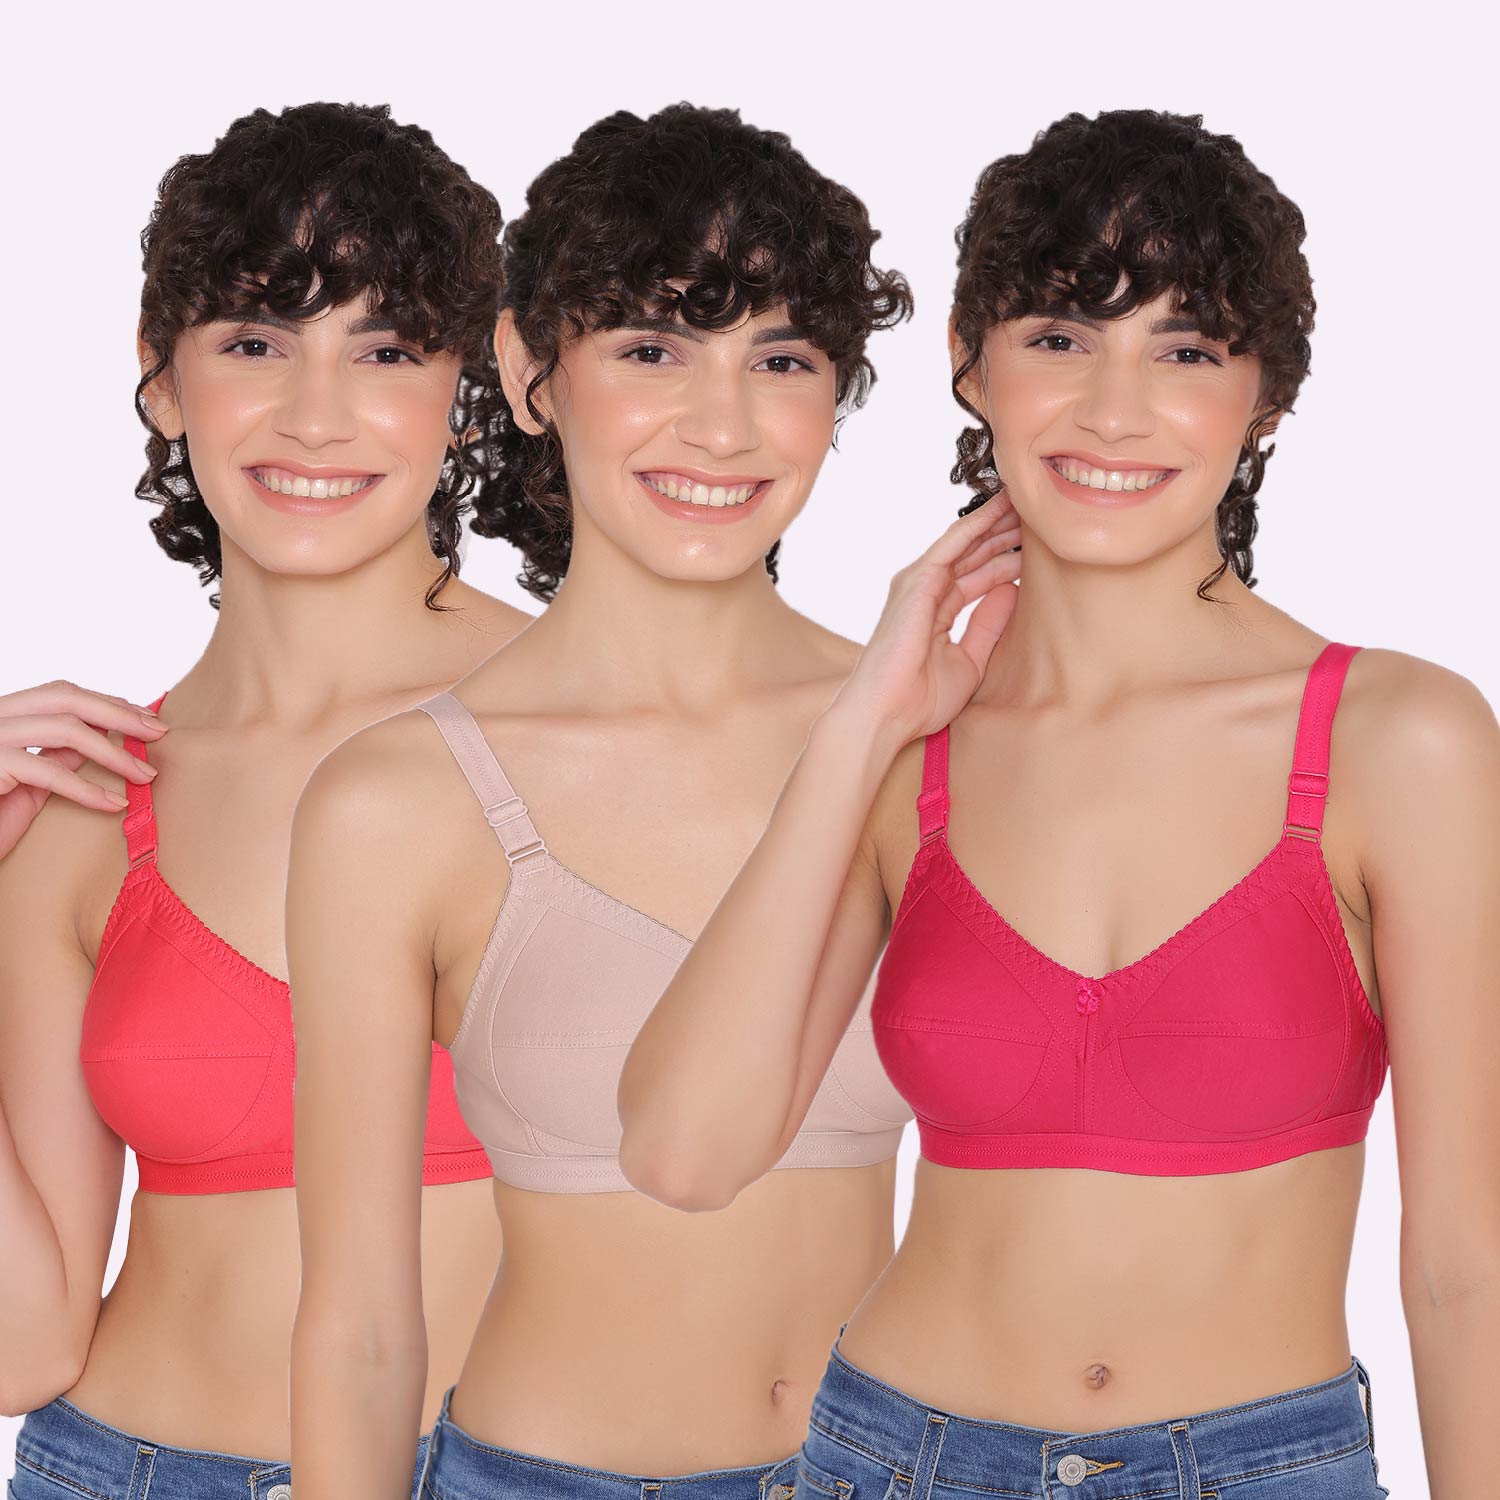 Buy Padded Bras Online at Best Prices in India